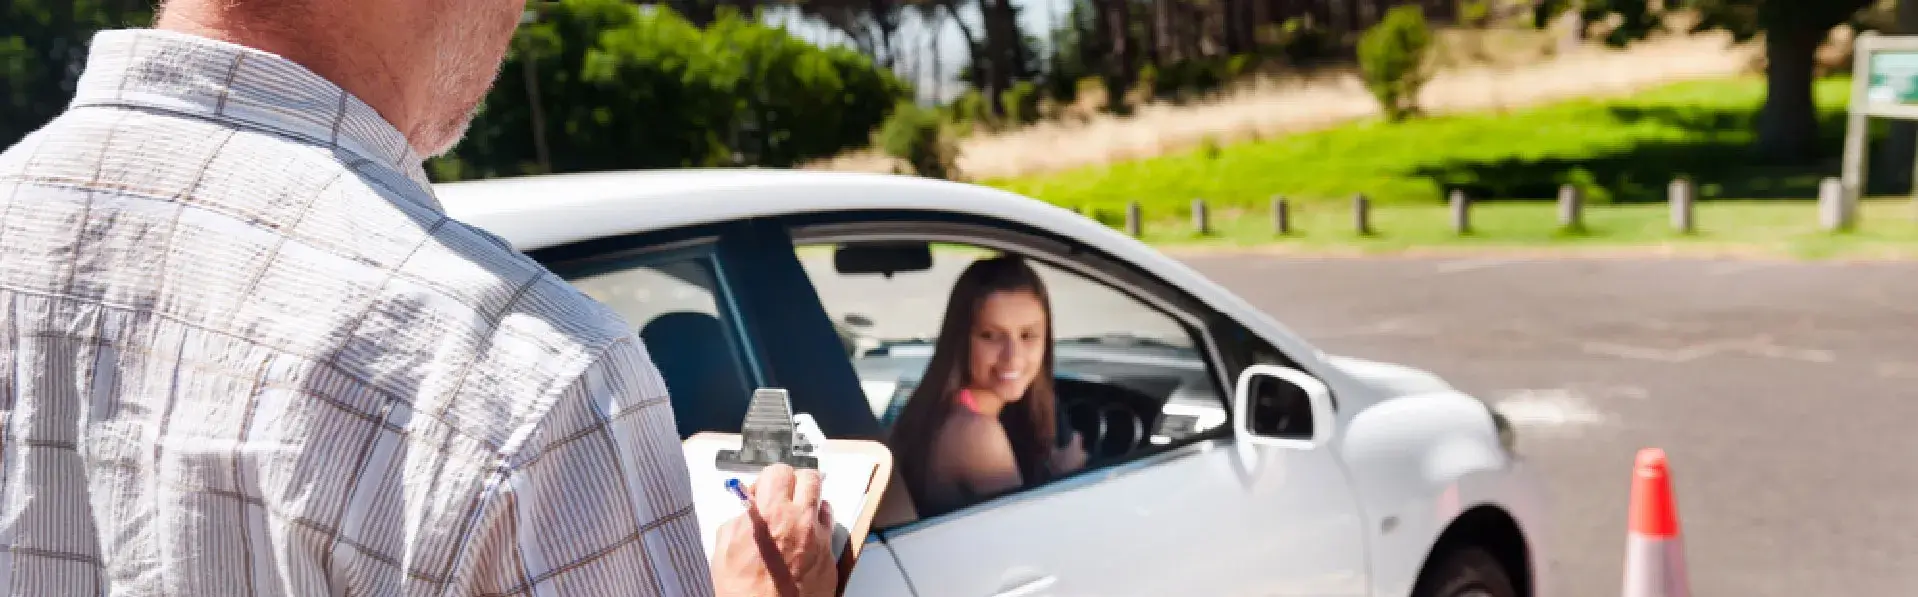 Driving instructor is holding a clipboard and standing outside near an empty parking lot. A woman inside a car is looking at the instructor. Traffic cones are visible in the background.